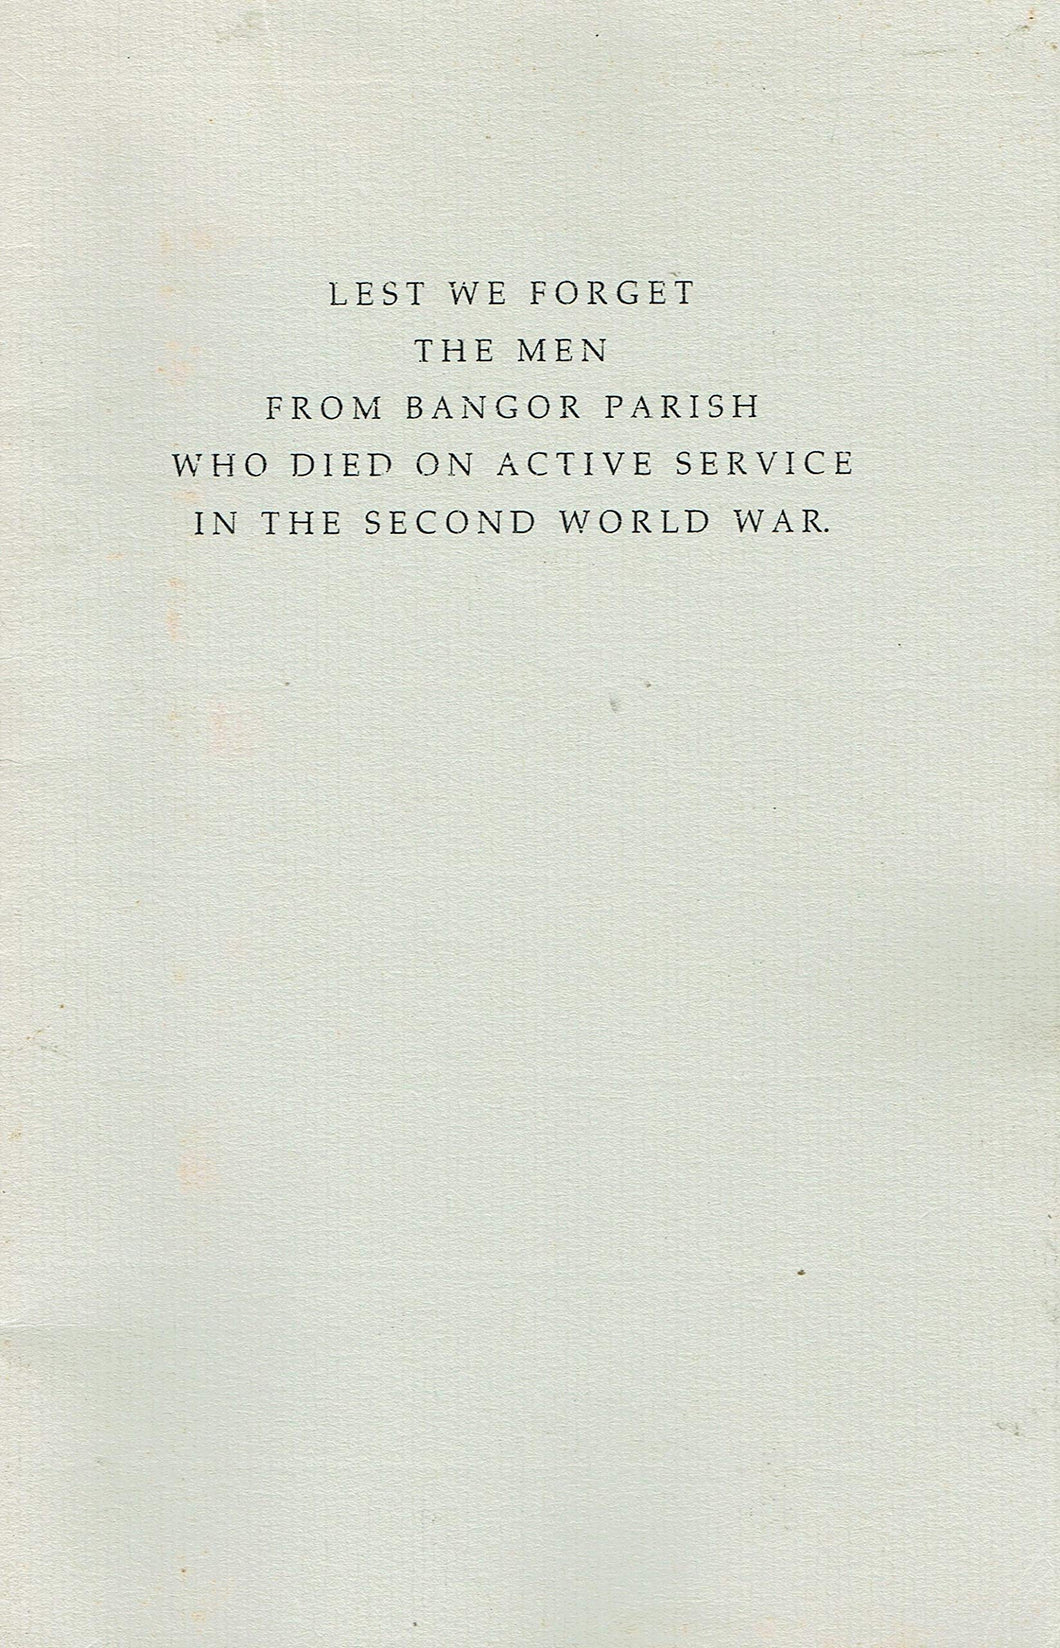 Lest We Forget - The Men from Bangor Parish Who Died on Active Service in the Second World War